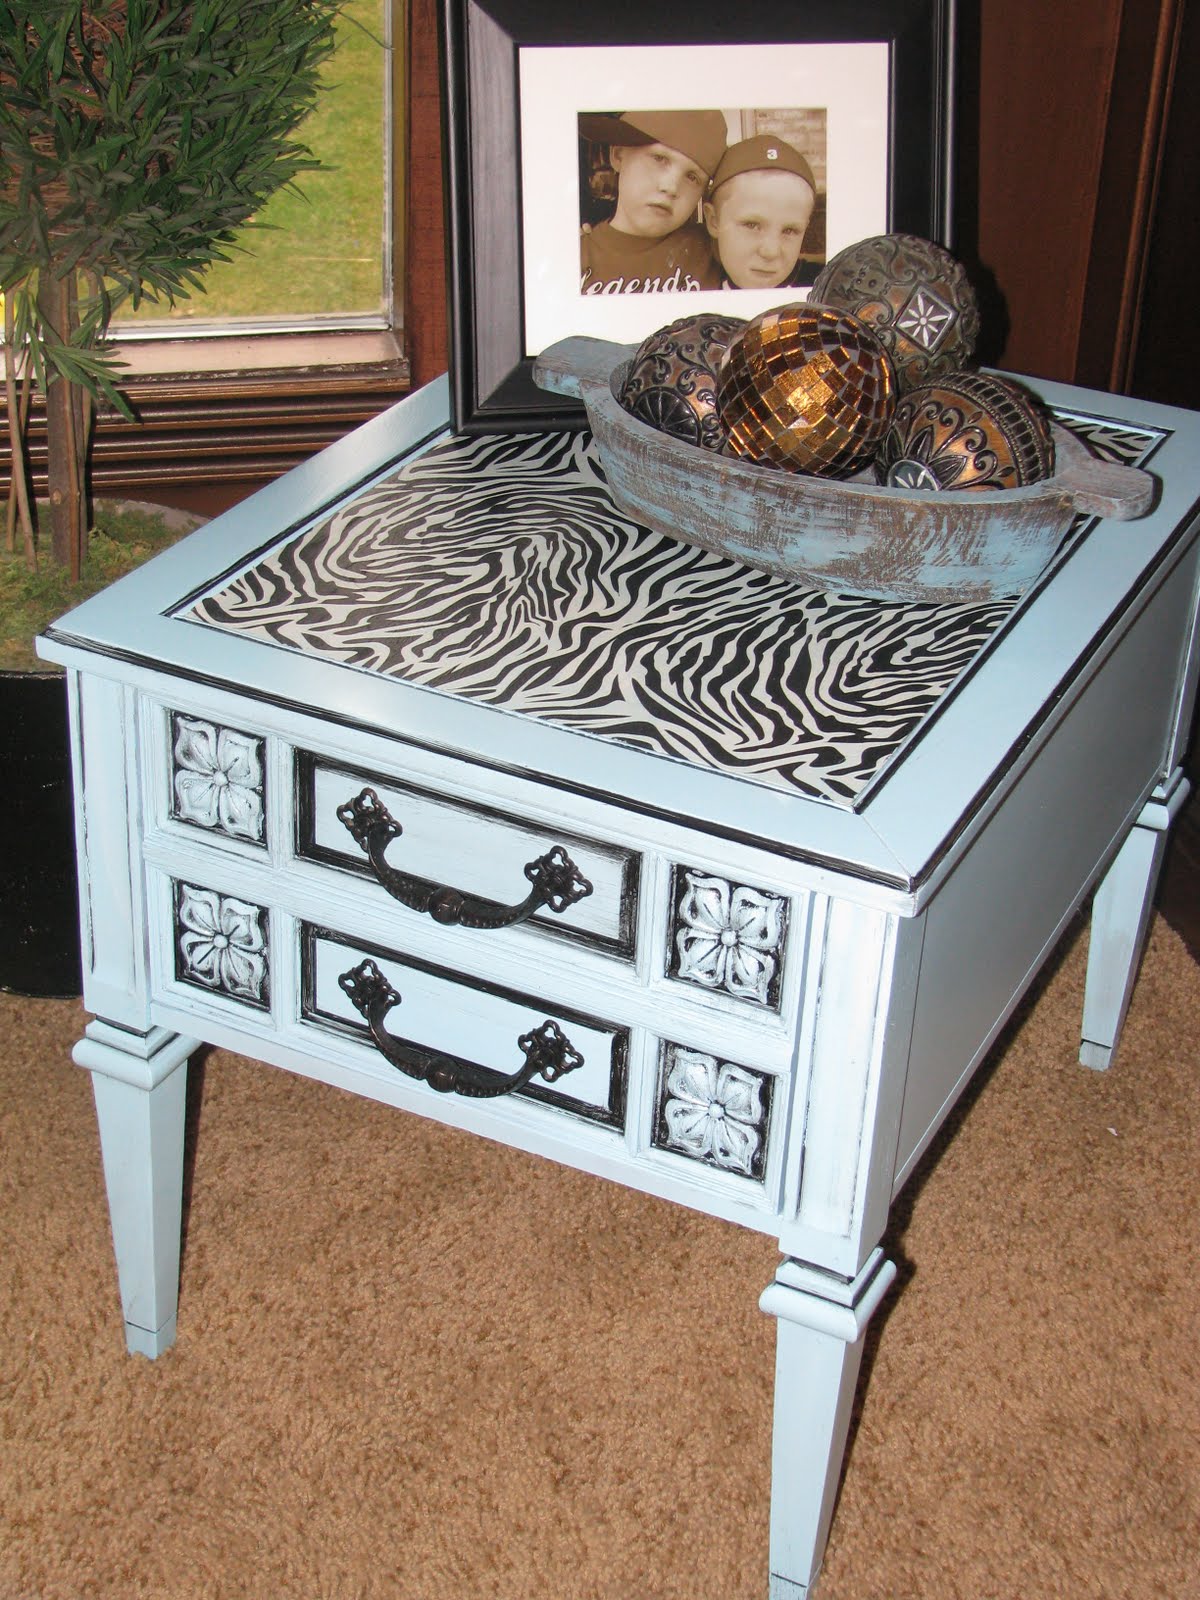 Turquoise & Zebra table….. done!